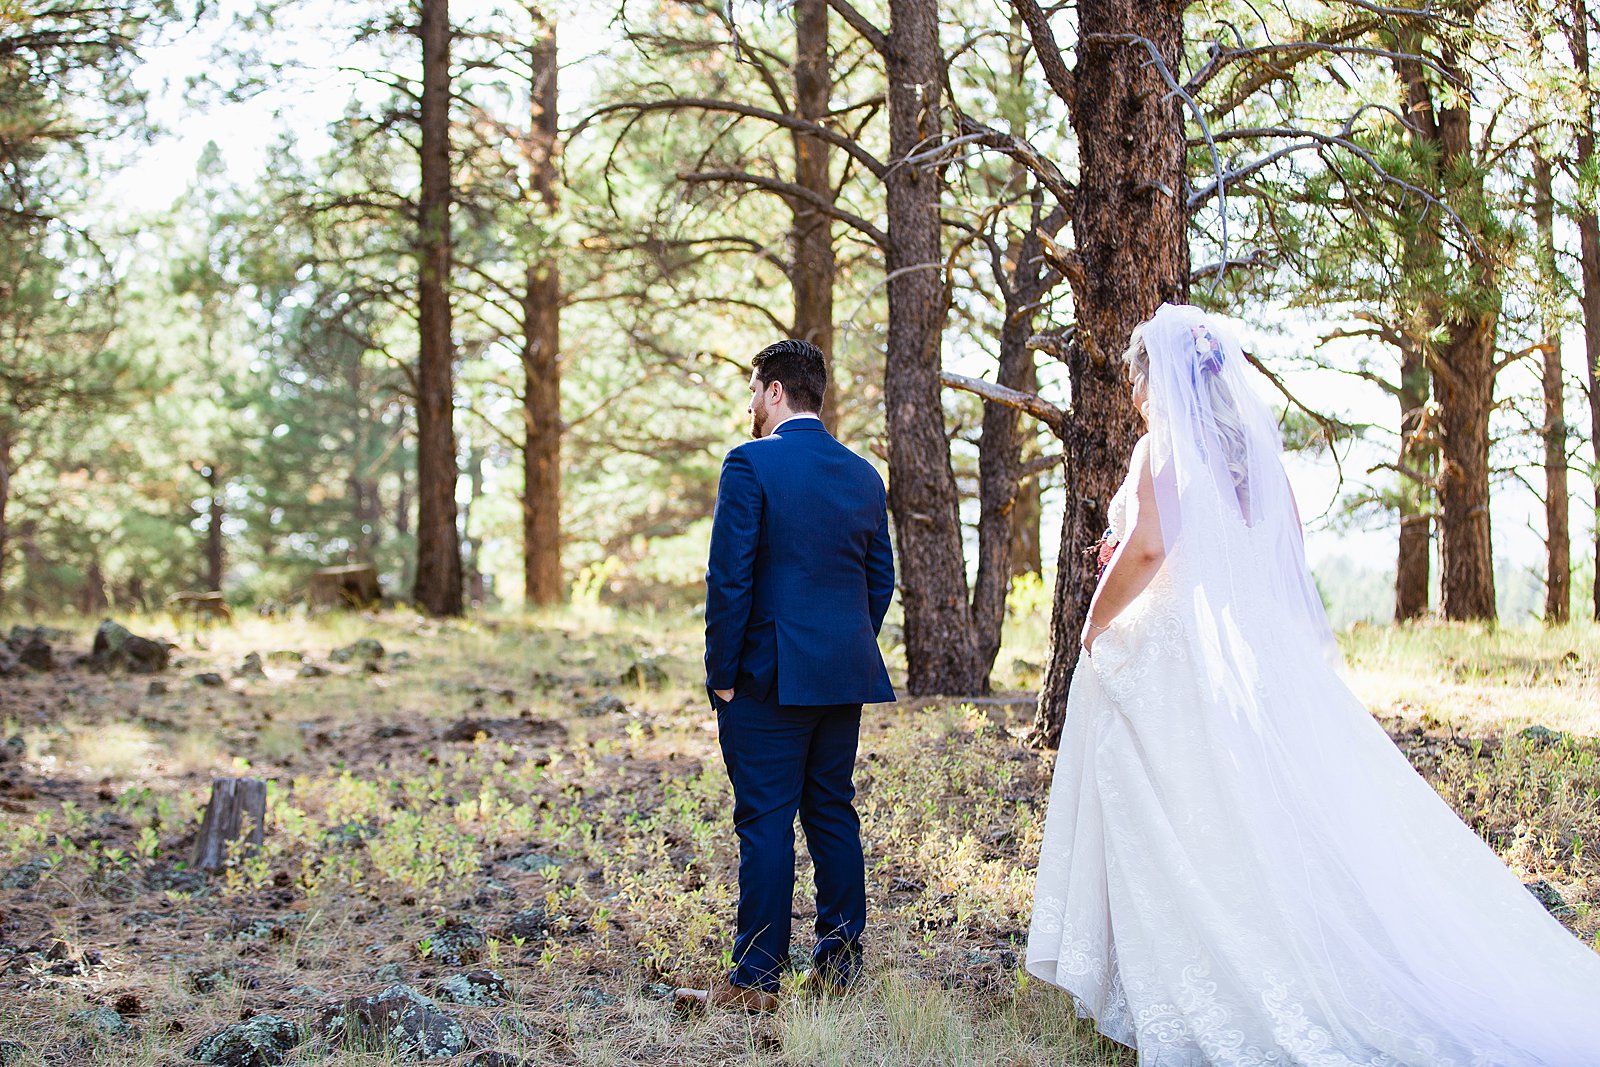 Bride and Groom's first look at Chapel of the Holy Dove by Arizona wedding photographer PMA Photography.